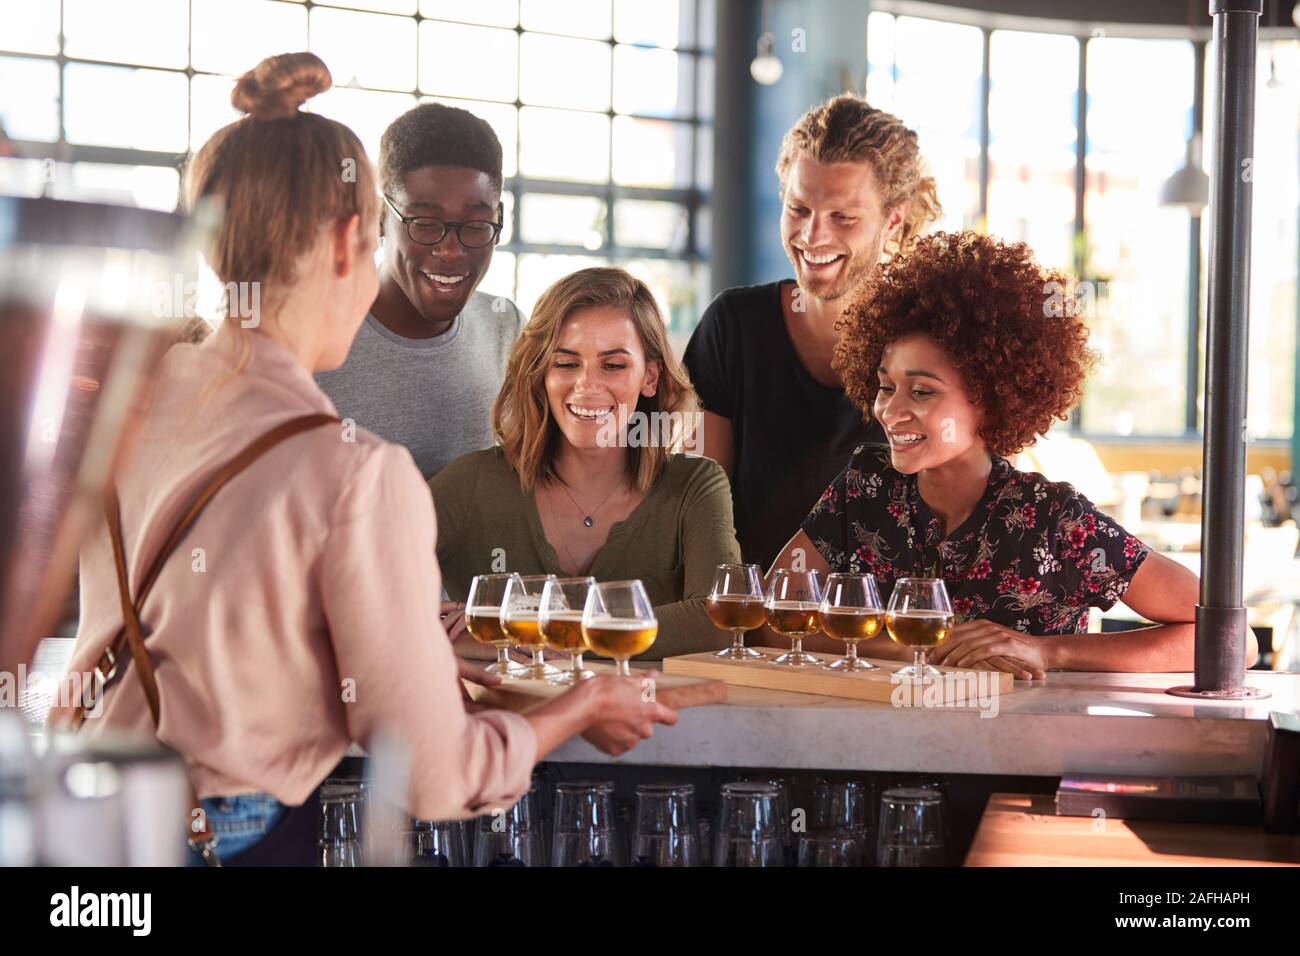 Waitress Serving Group Of Friends Beer Tasting In Bar Stock Photo